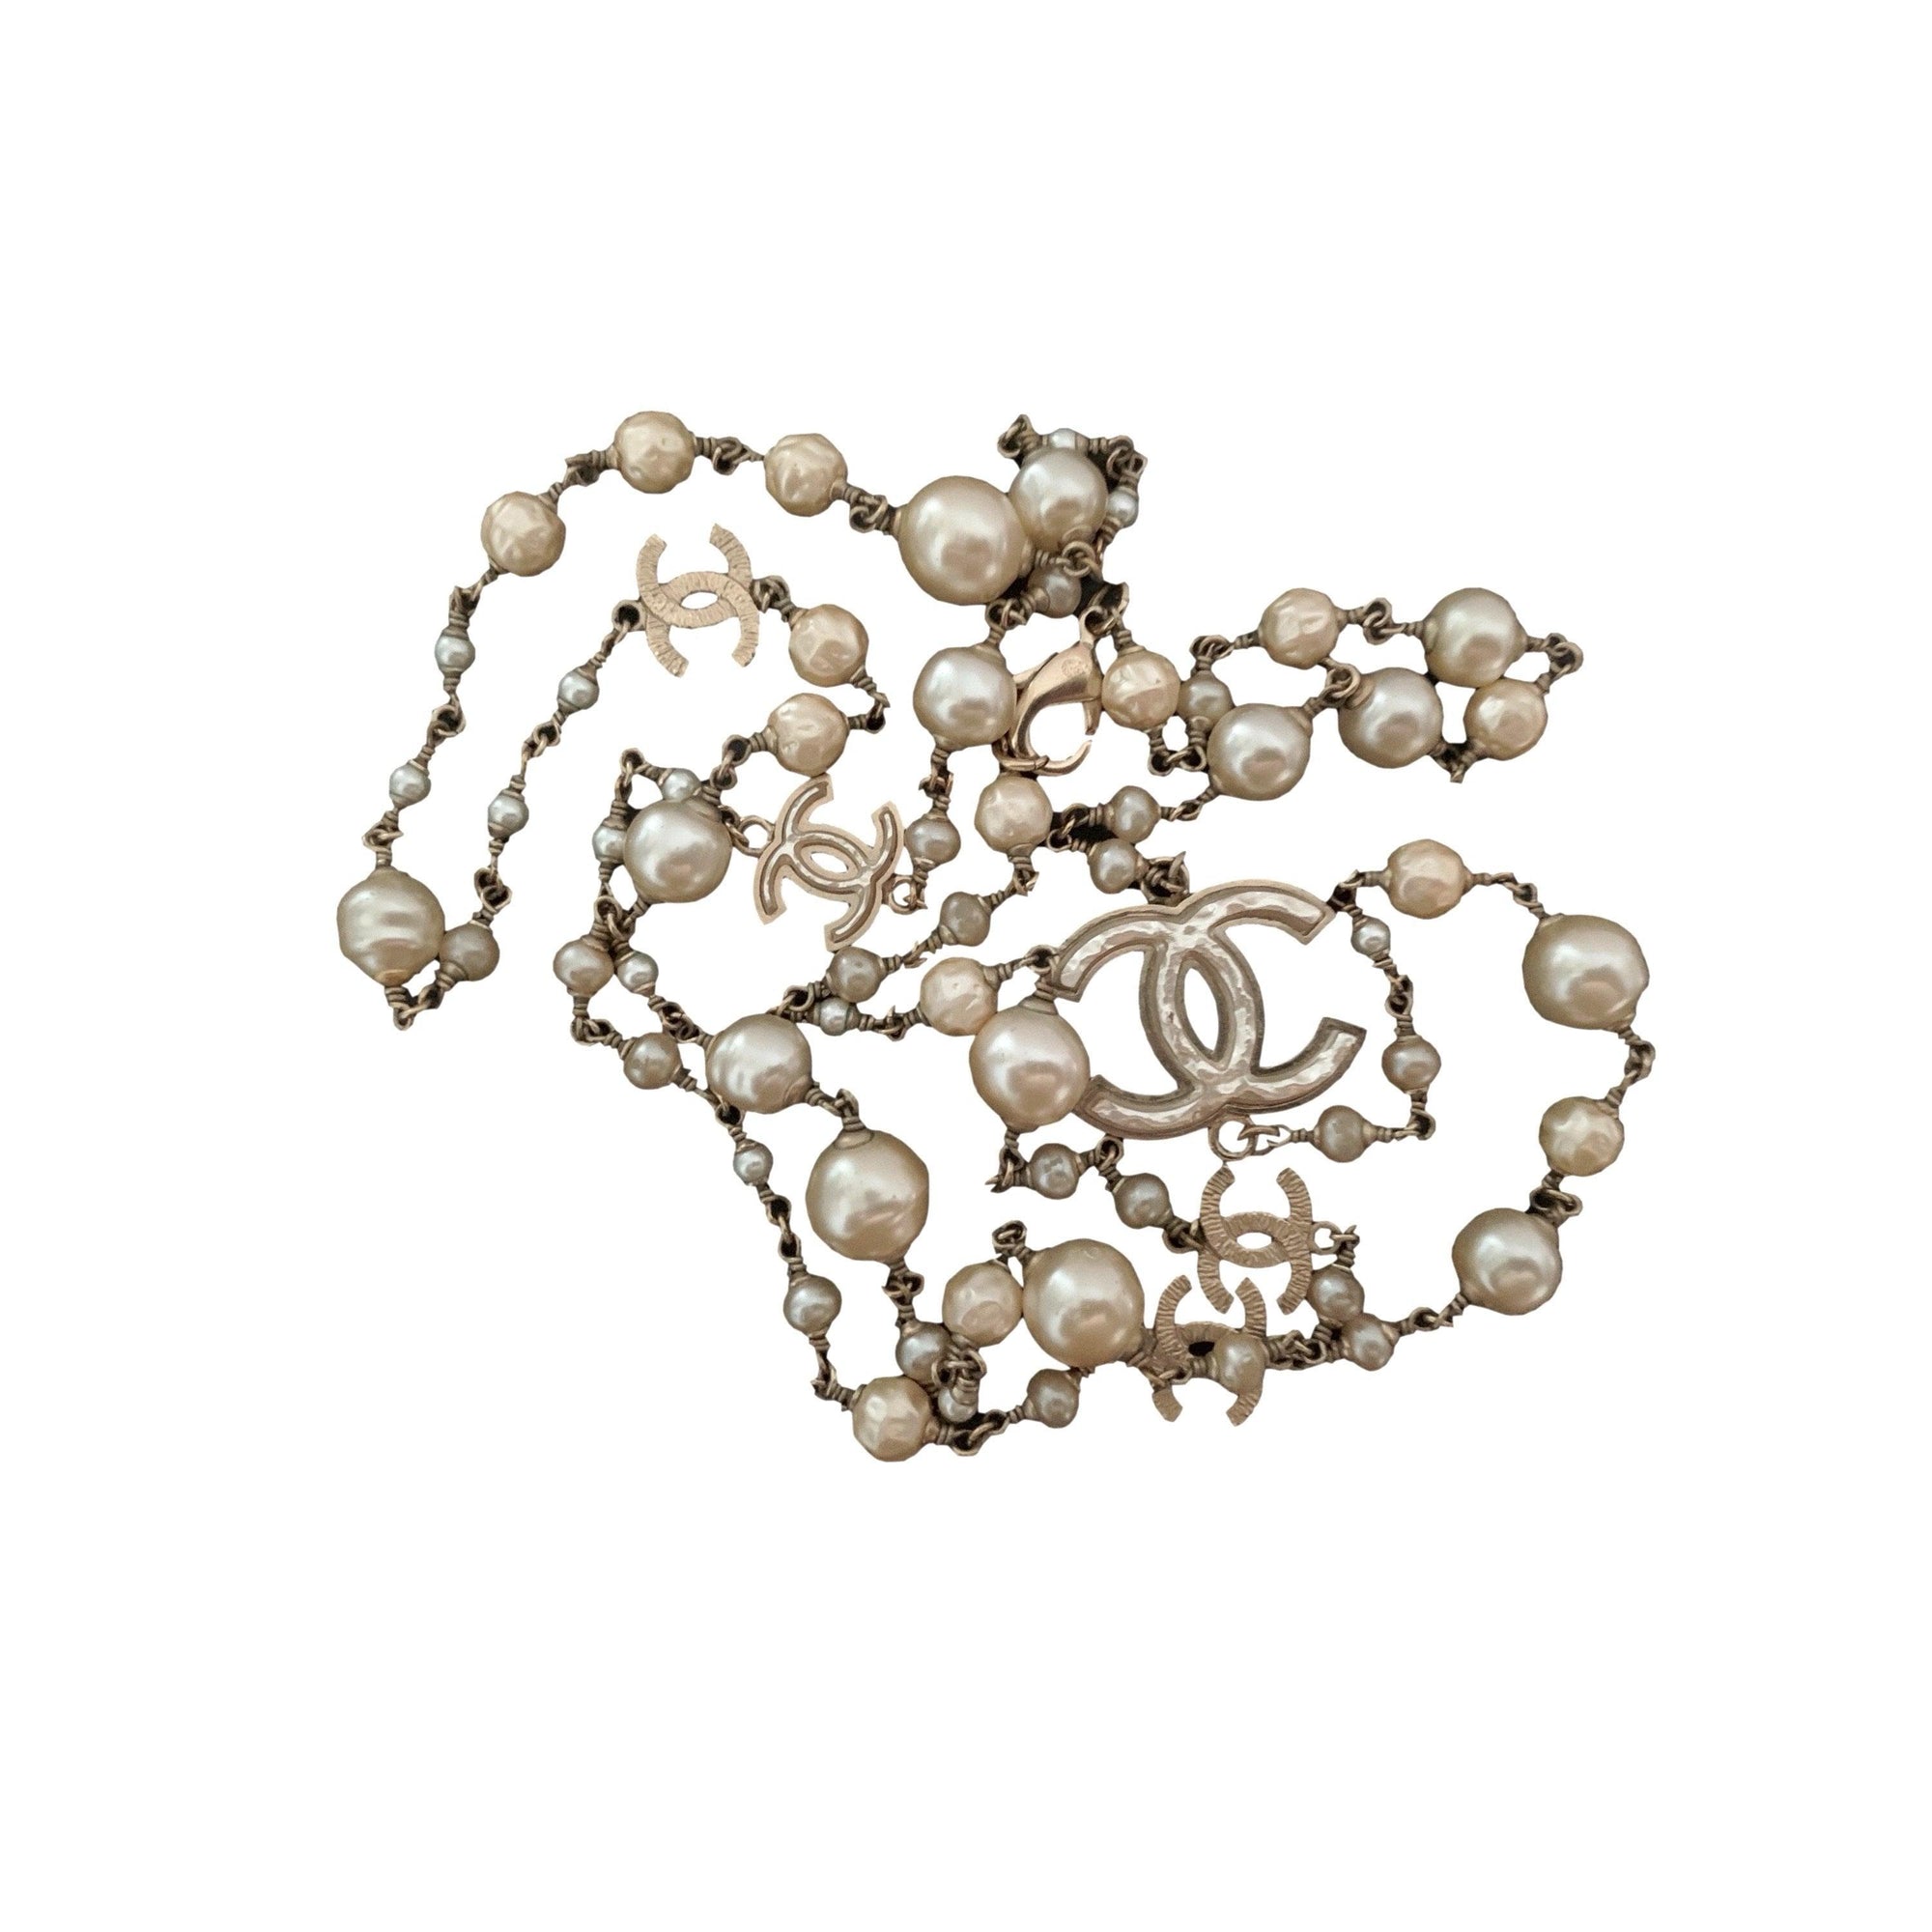 Chanel Muted Gold and Pearl Necklace - Jewelry